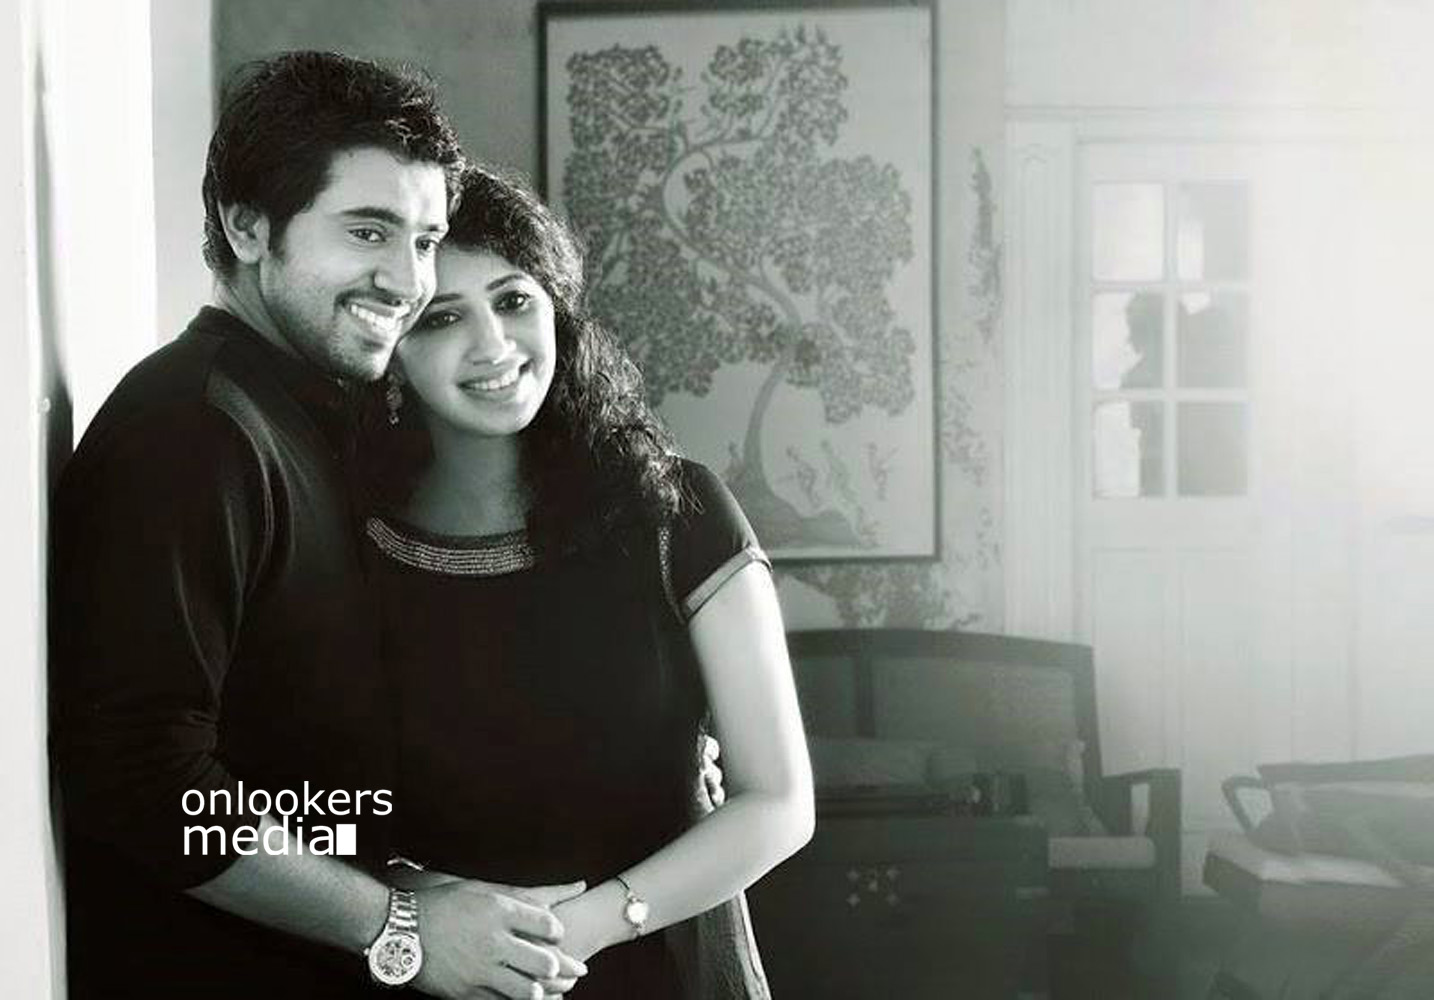 https://onlookersmedia.in/wp-content/uploads/2015/06/Nivin-Pauly-with-wife-Rinna-Joy-Nivin-Pauly-Family-Rare-Unseen-Stills-Images-Photos-Onlookers-Media-7.jpg